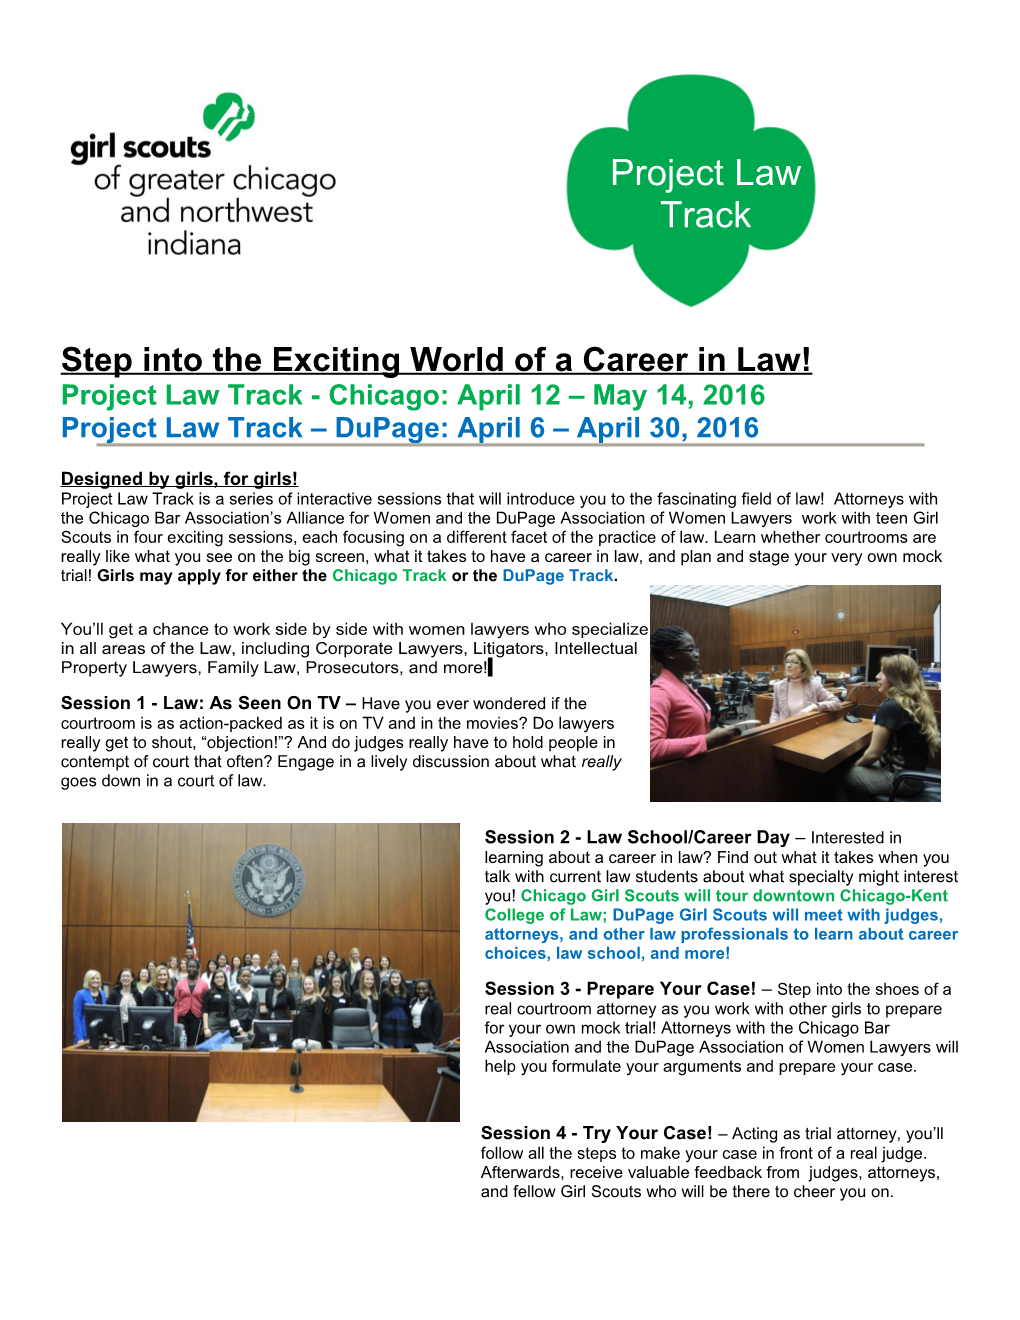 Step Into the Exciting World of a Career in Law!